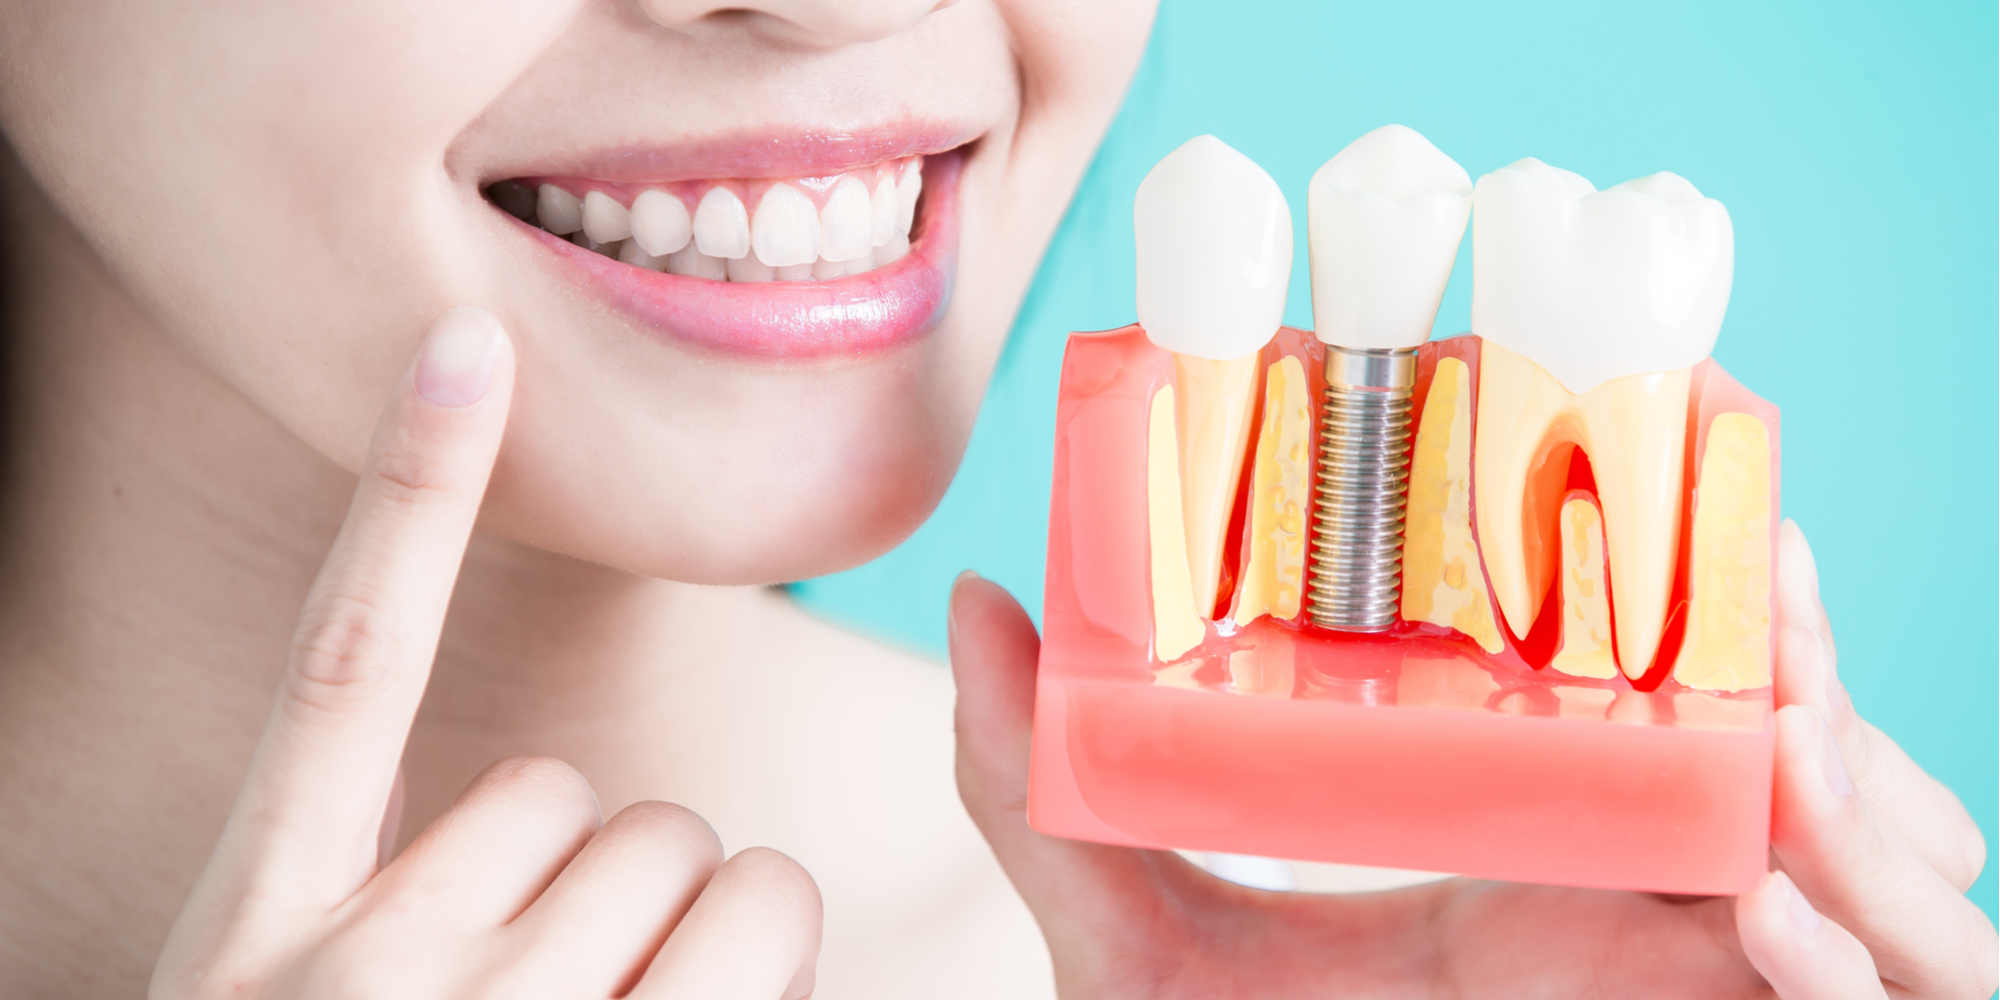 5 Benefits of Tooth Implants You Need to Know